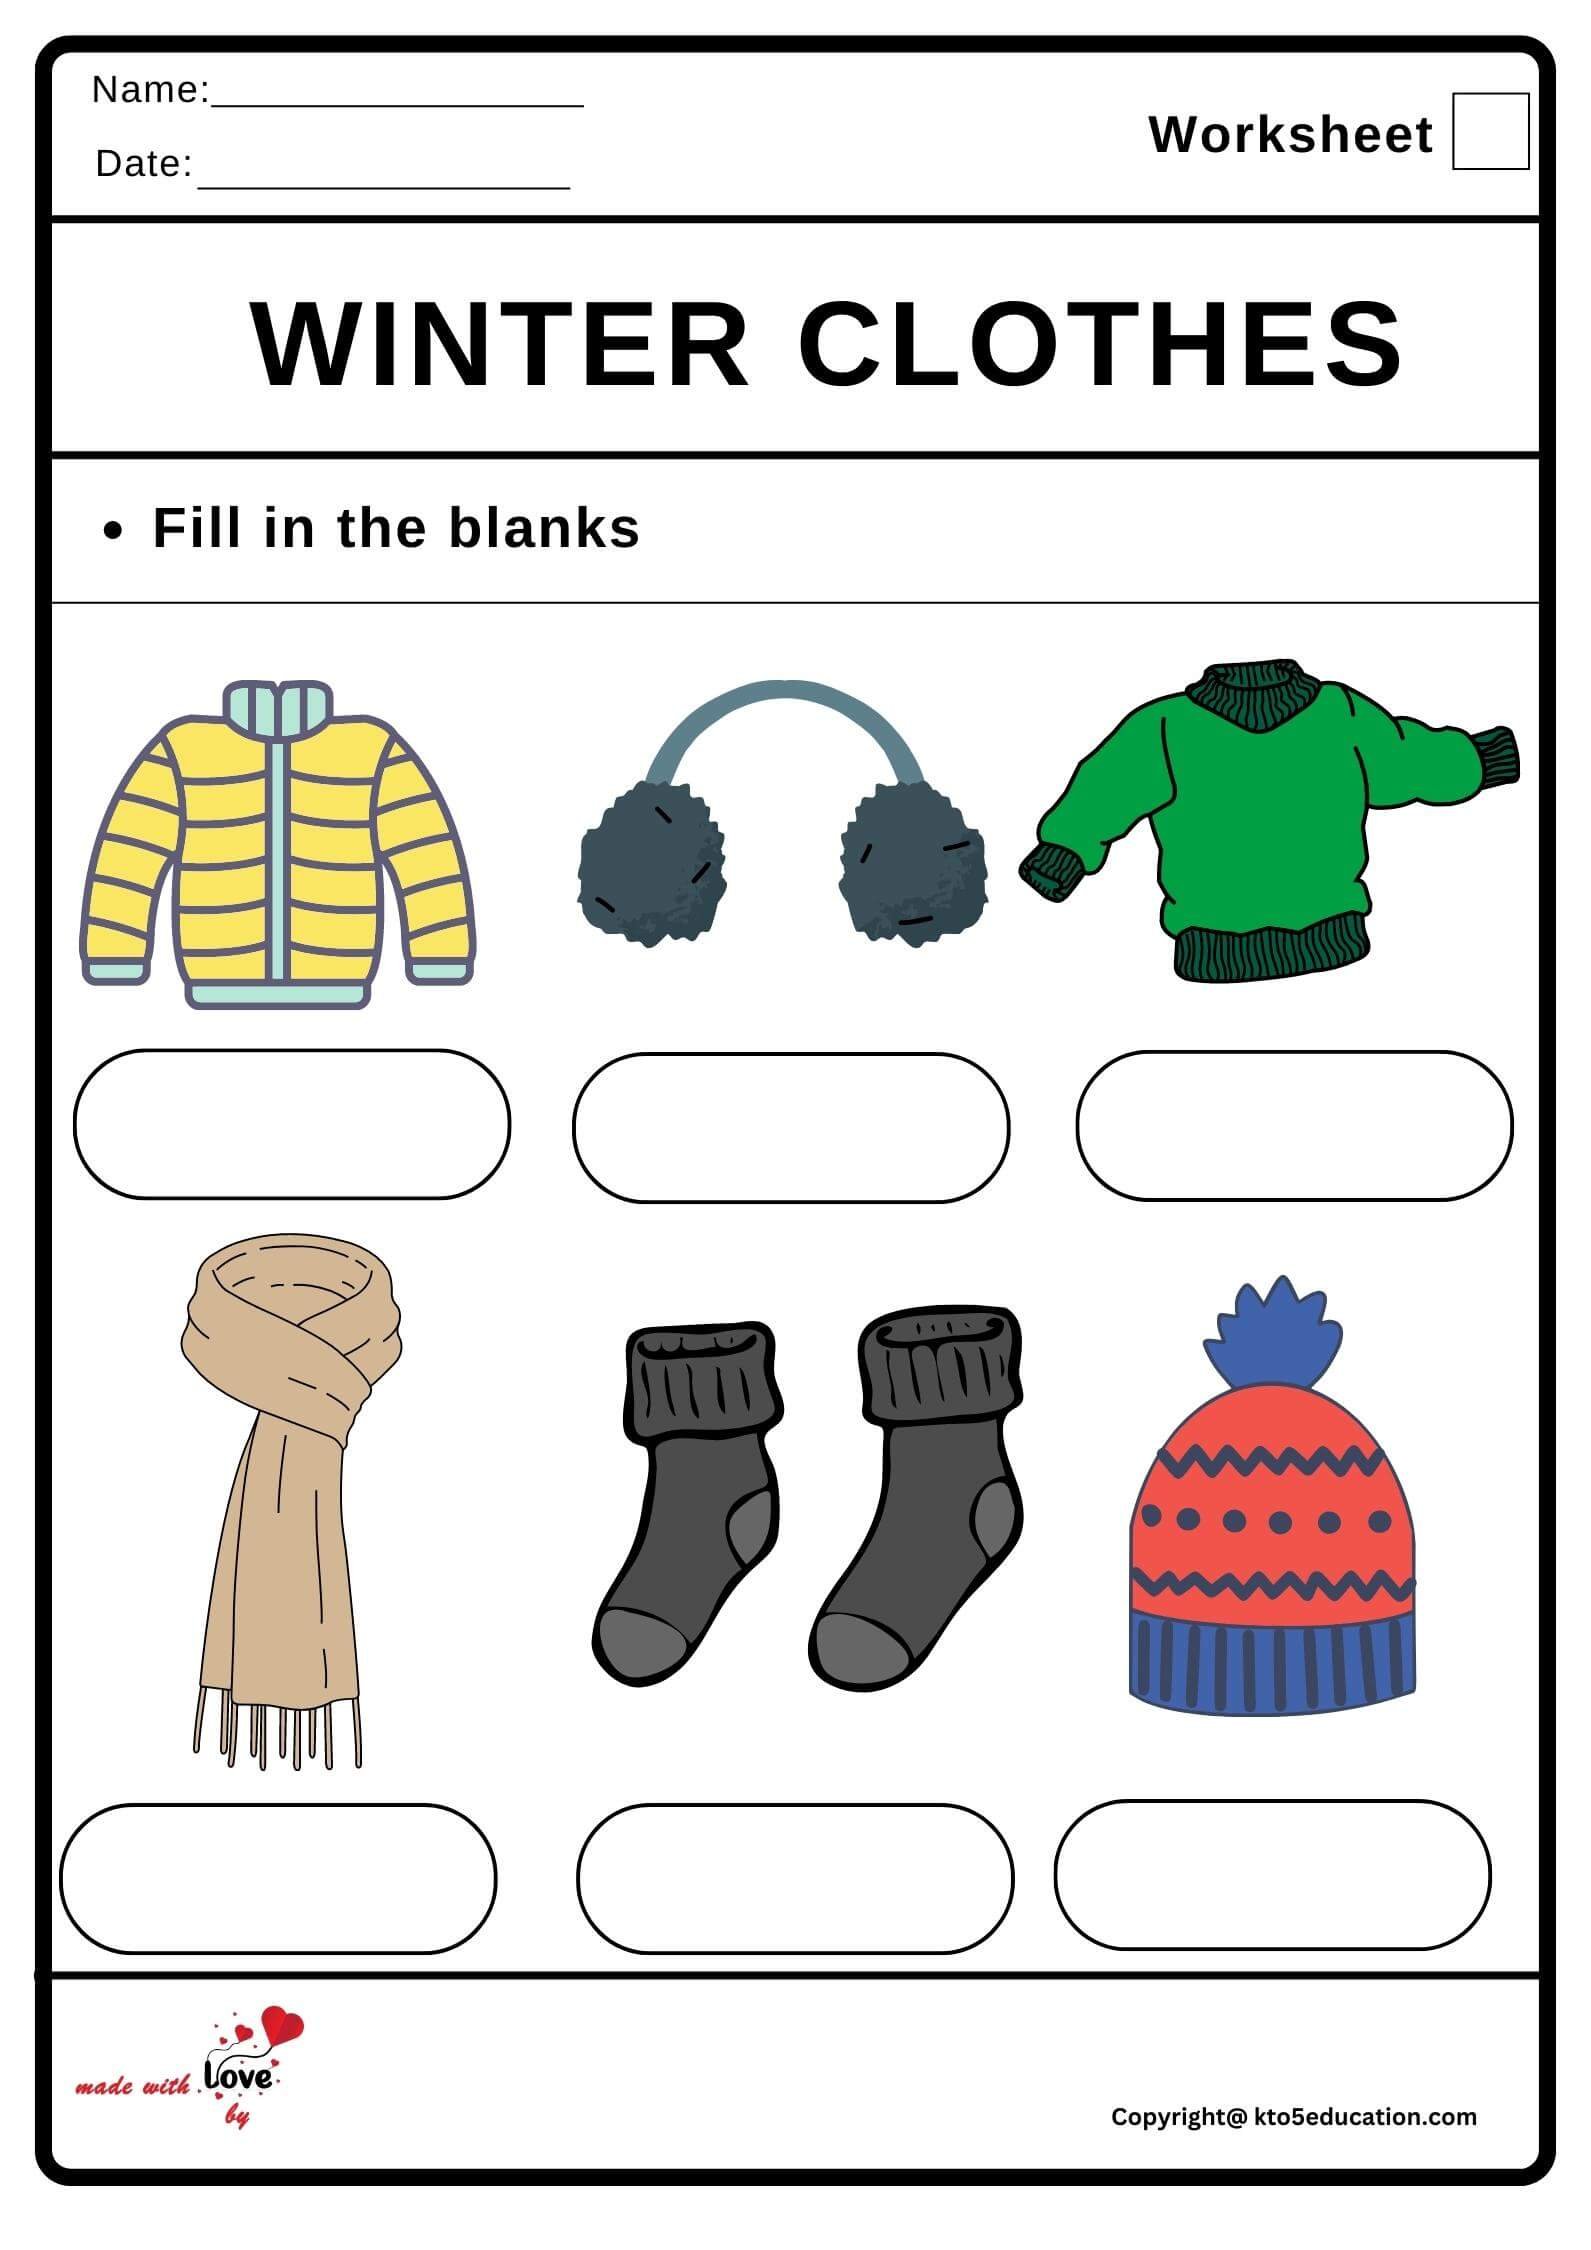 Winter Clothes Worksheet 2